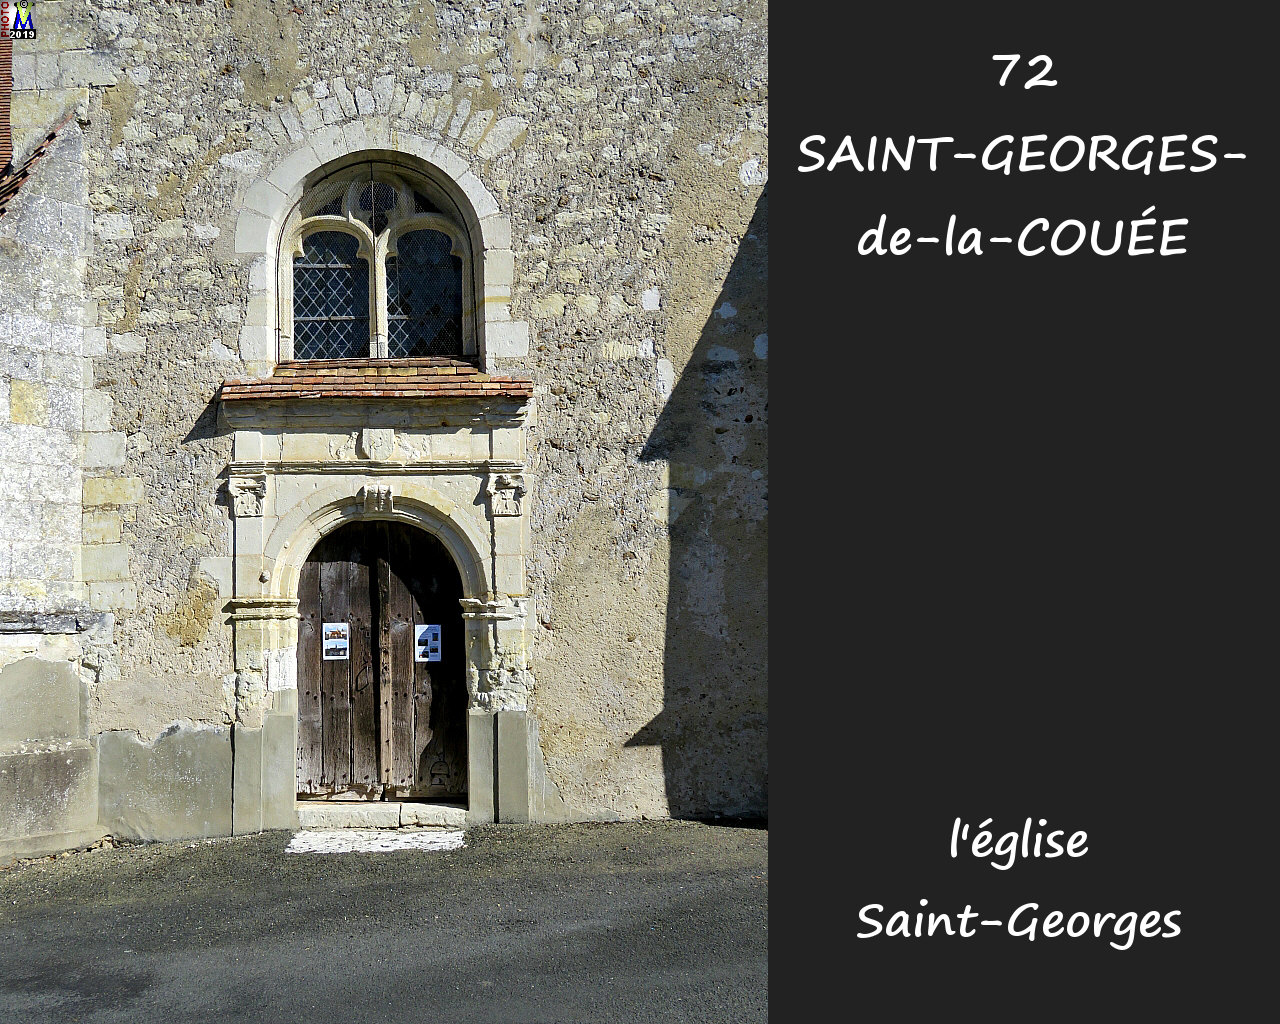 72StGEORGES-COUEE_eglise_110.jpg